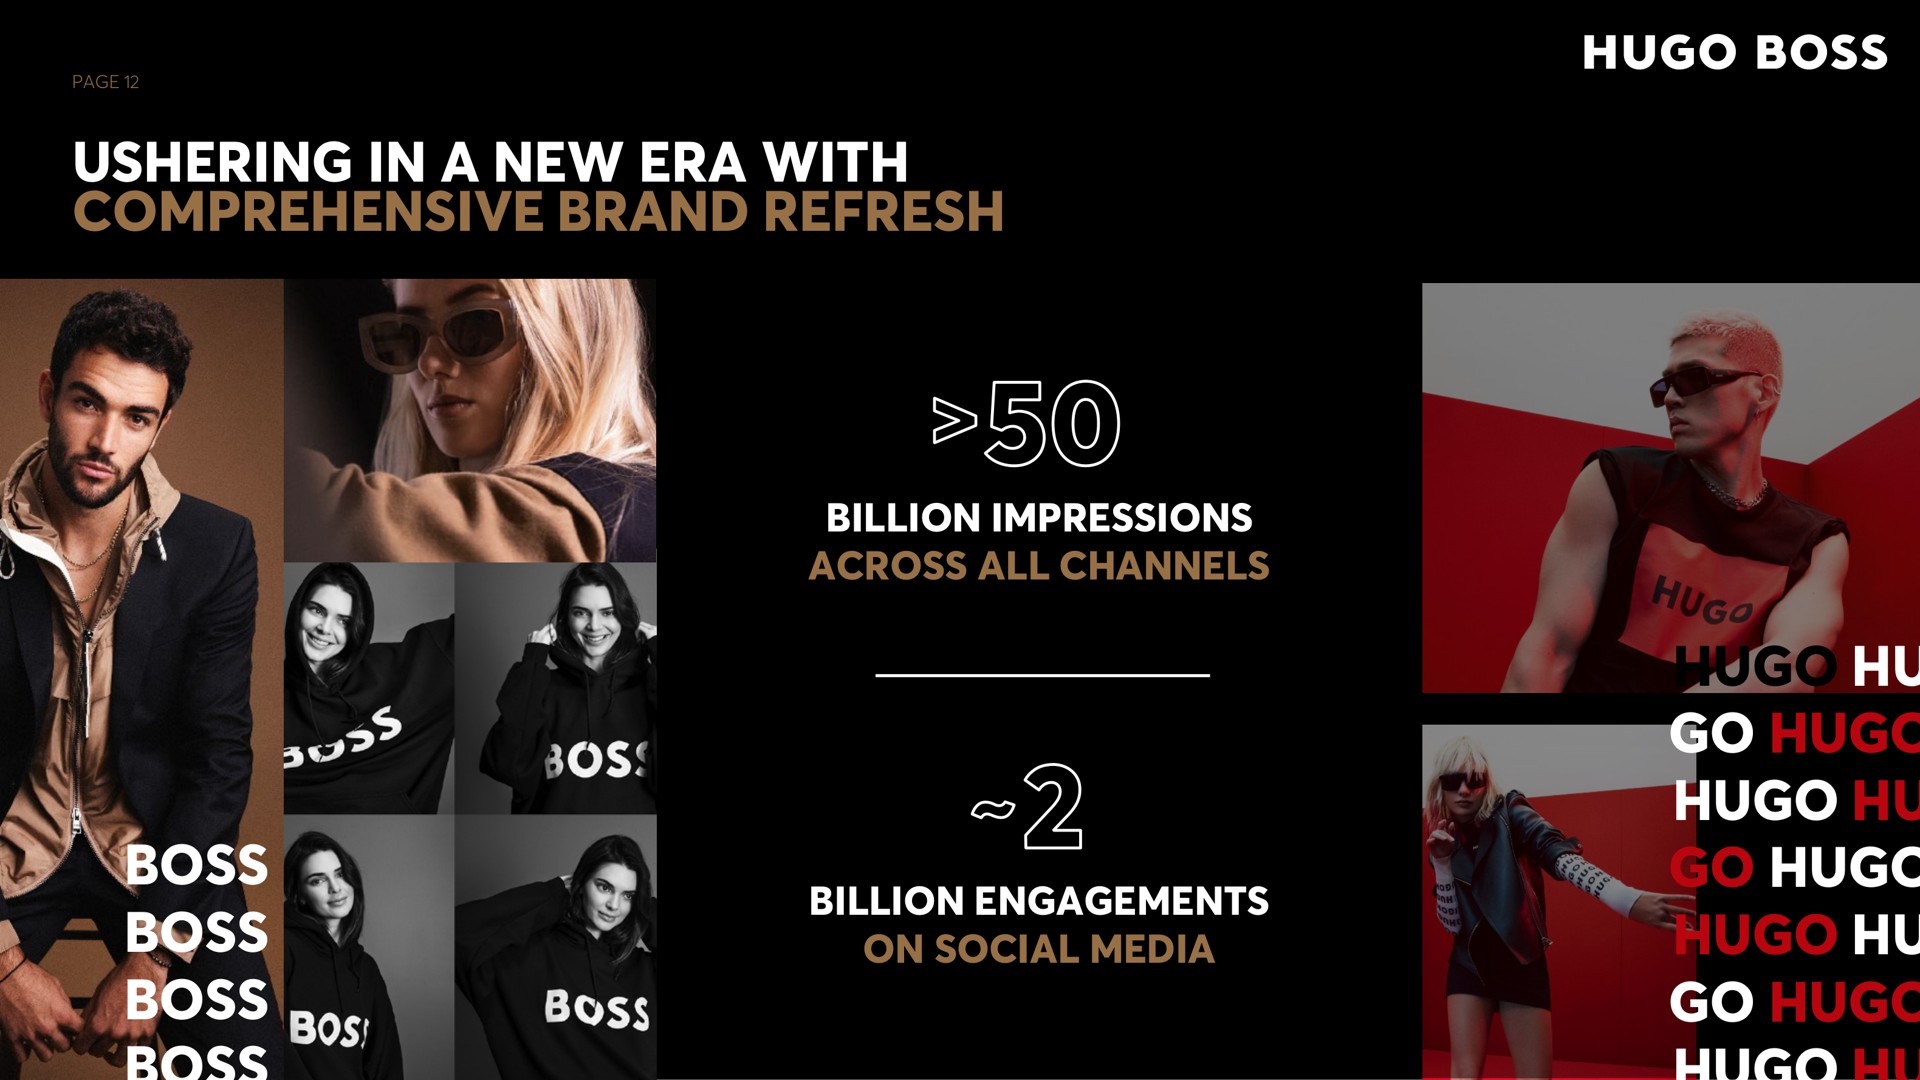 page ushering in a new era with comprehensive brand refresh billion impressions across all channels billion engagements on social media go go go boss boss boss boss do | Hugo Boss